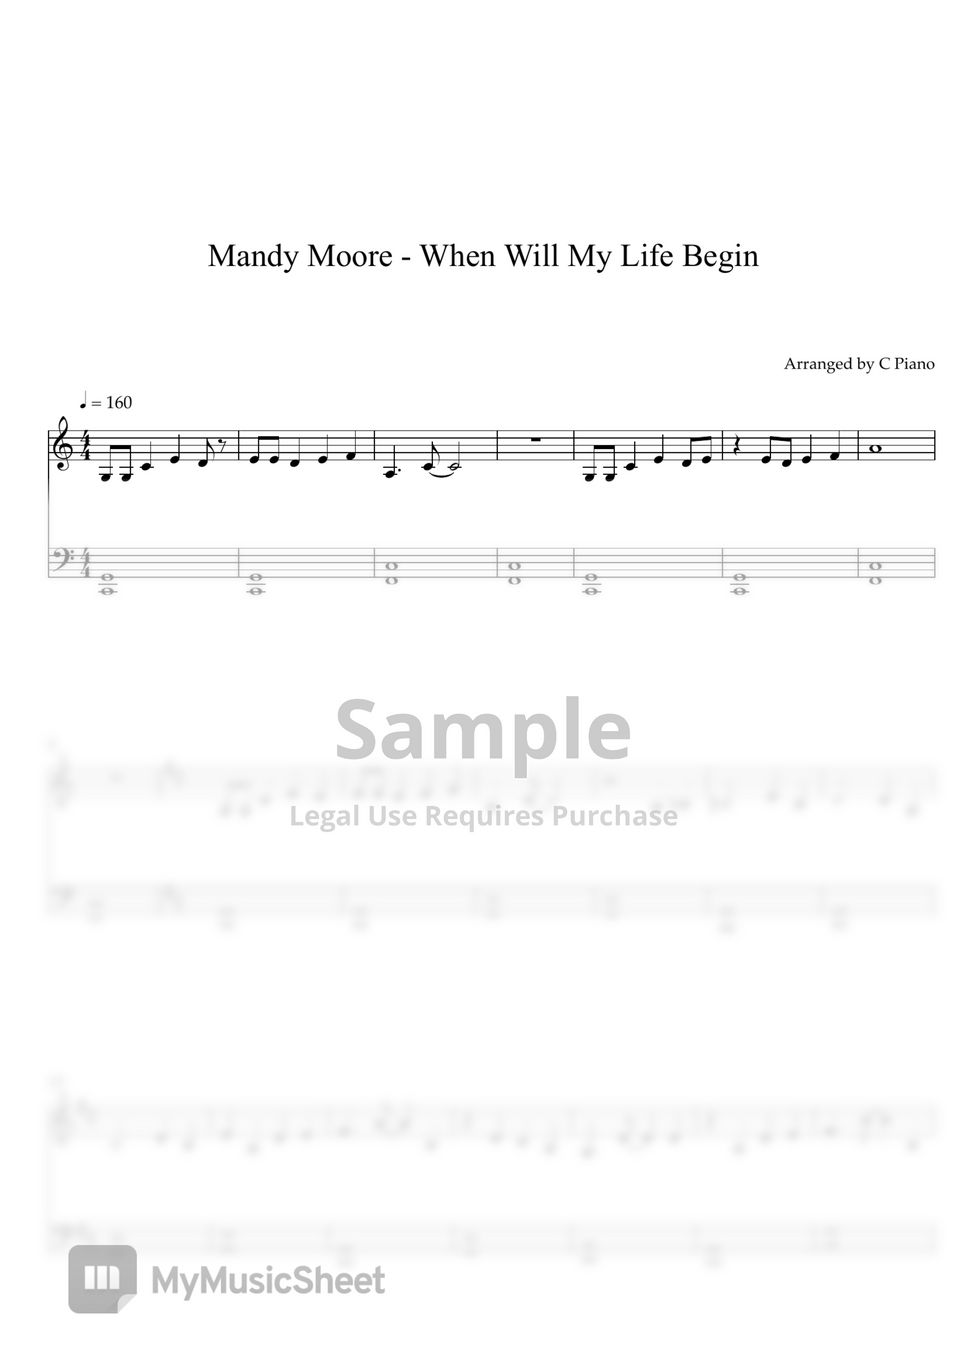 Mandy Moore - When Will My Life Begin?(EASY Piano) (Easy Version) by C Piano